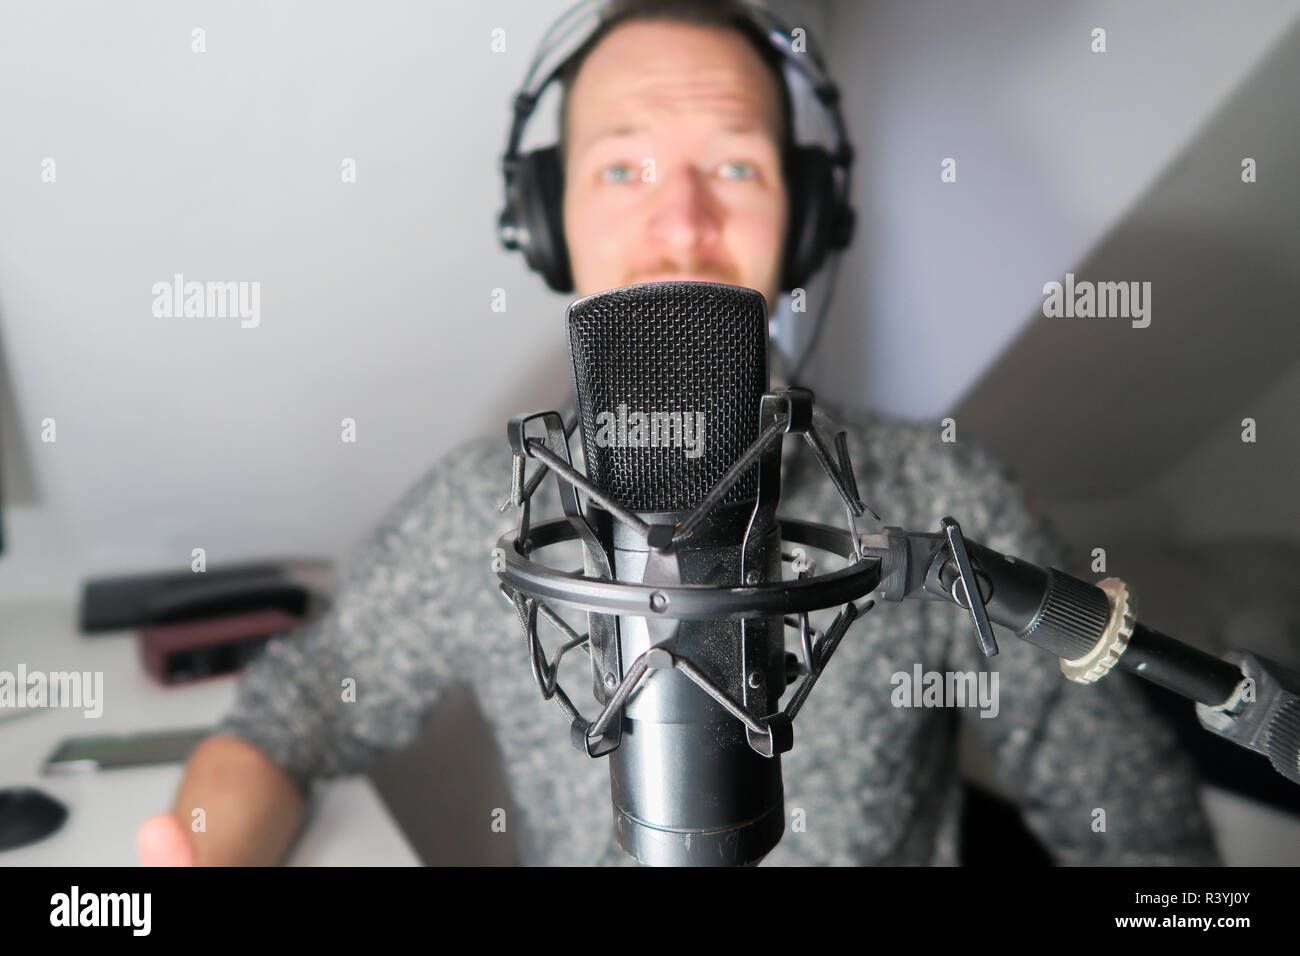 Young male behind condenser microphone radio podcast host voice recording Stock Photo